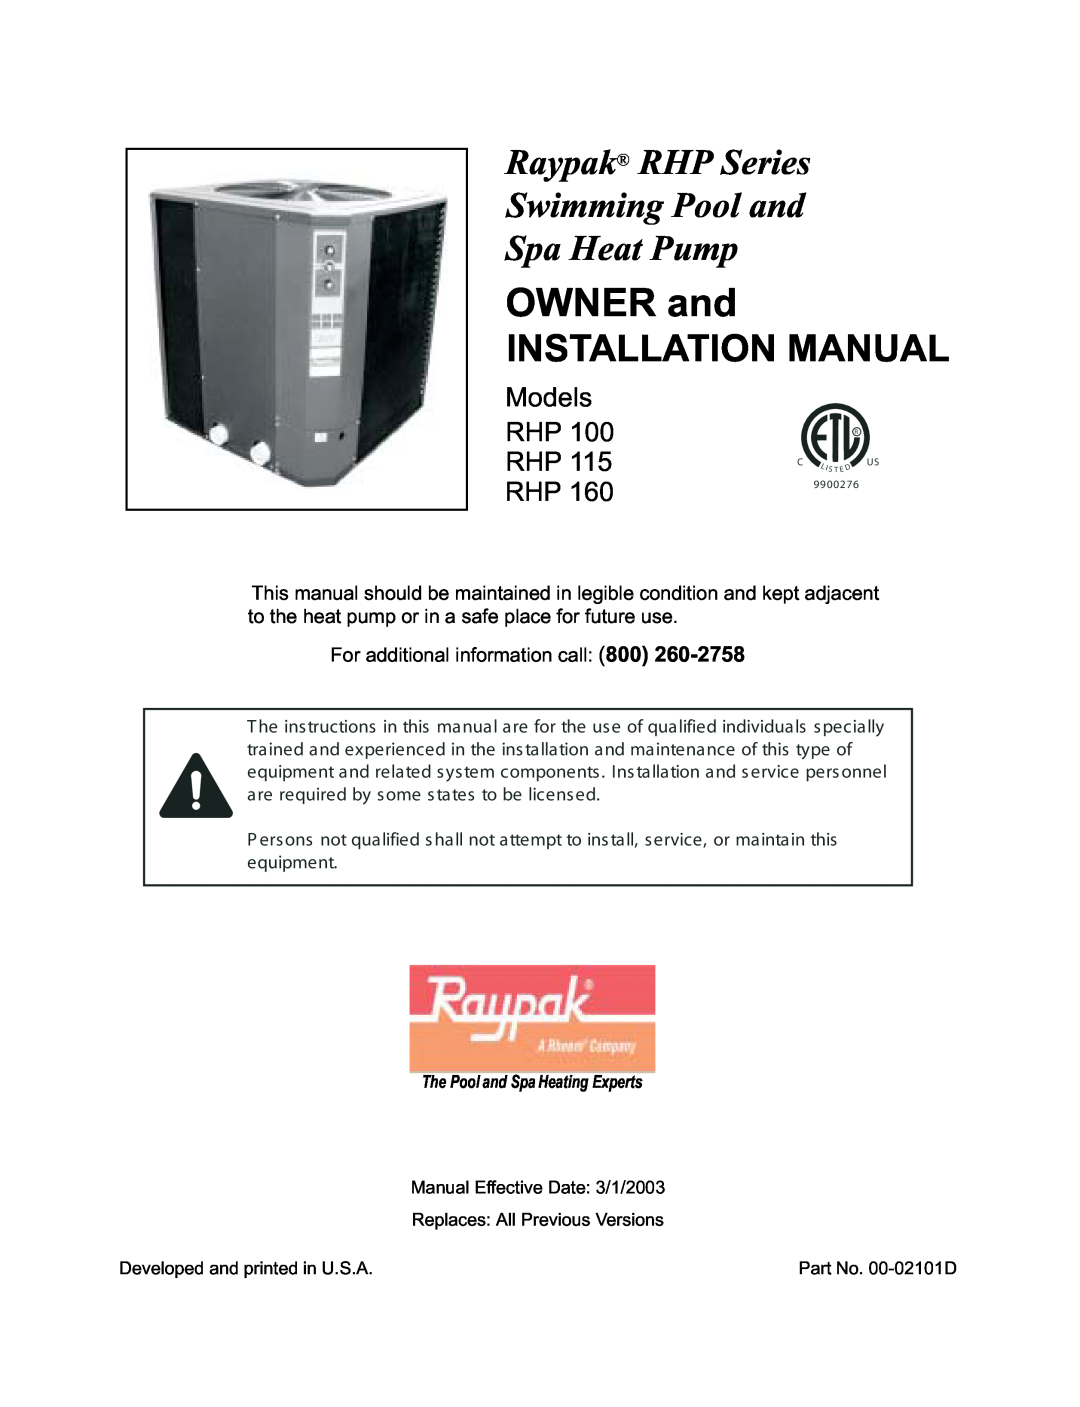 Raypak RHP100 installation manual OWNER and, Installation Manual, Raypak RHP Series Swimming Pool and Spa Heat Pump 